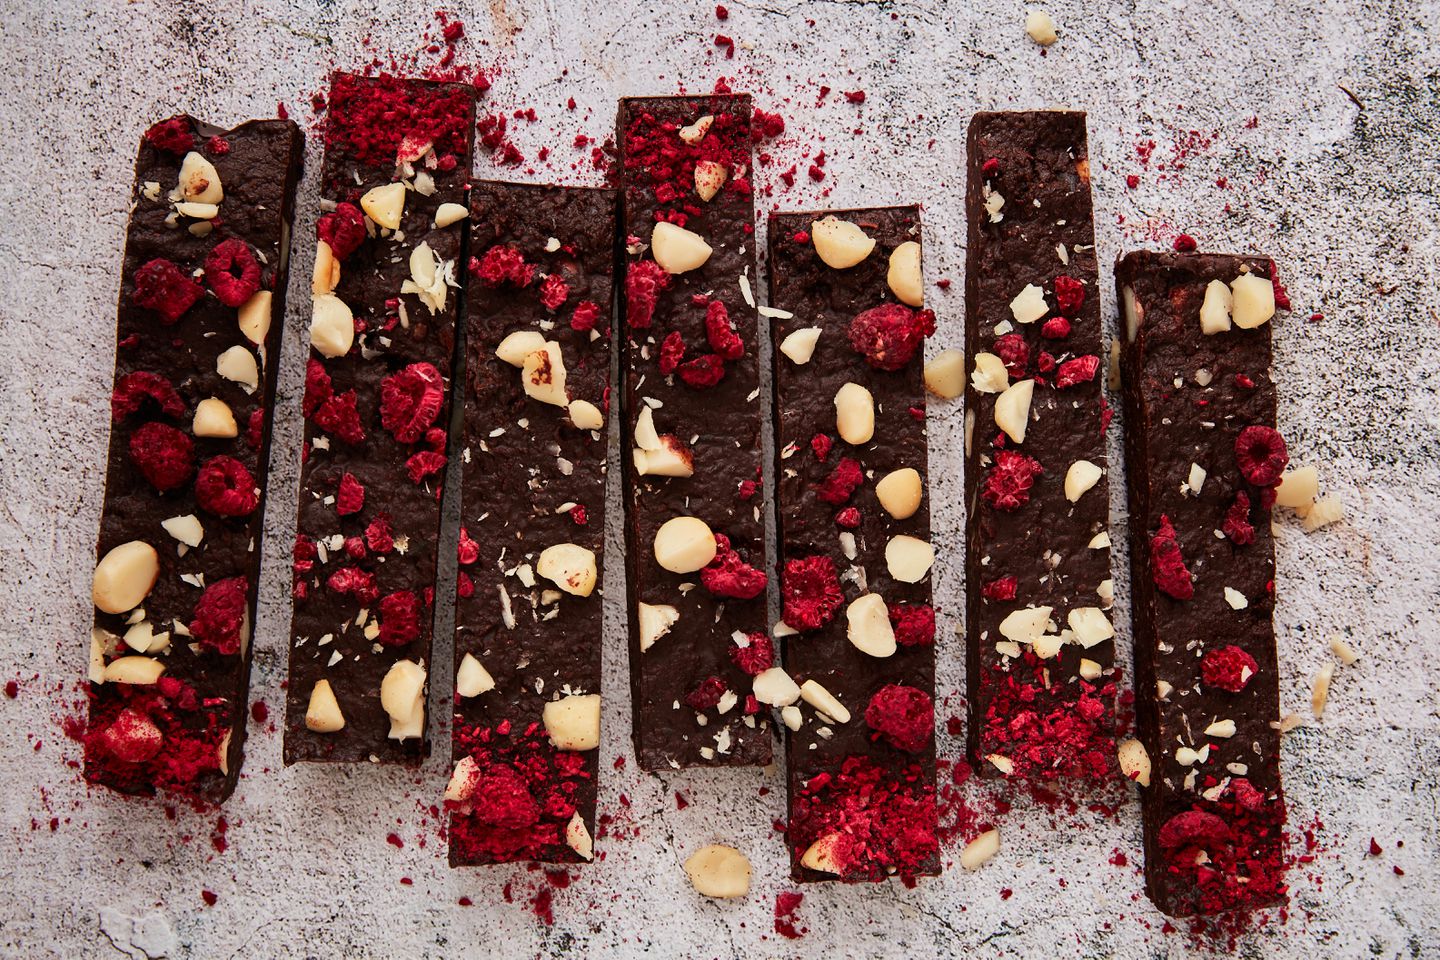 This Chocolate Macadamia Slice Recipe Is An Absolute Treat